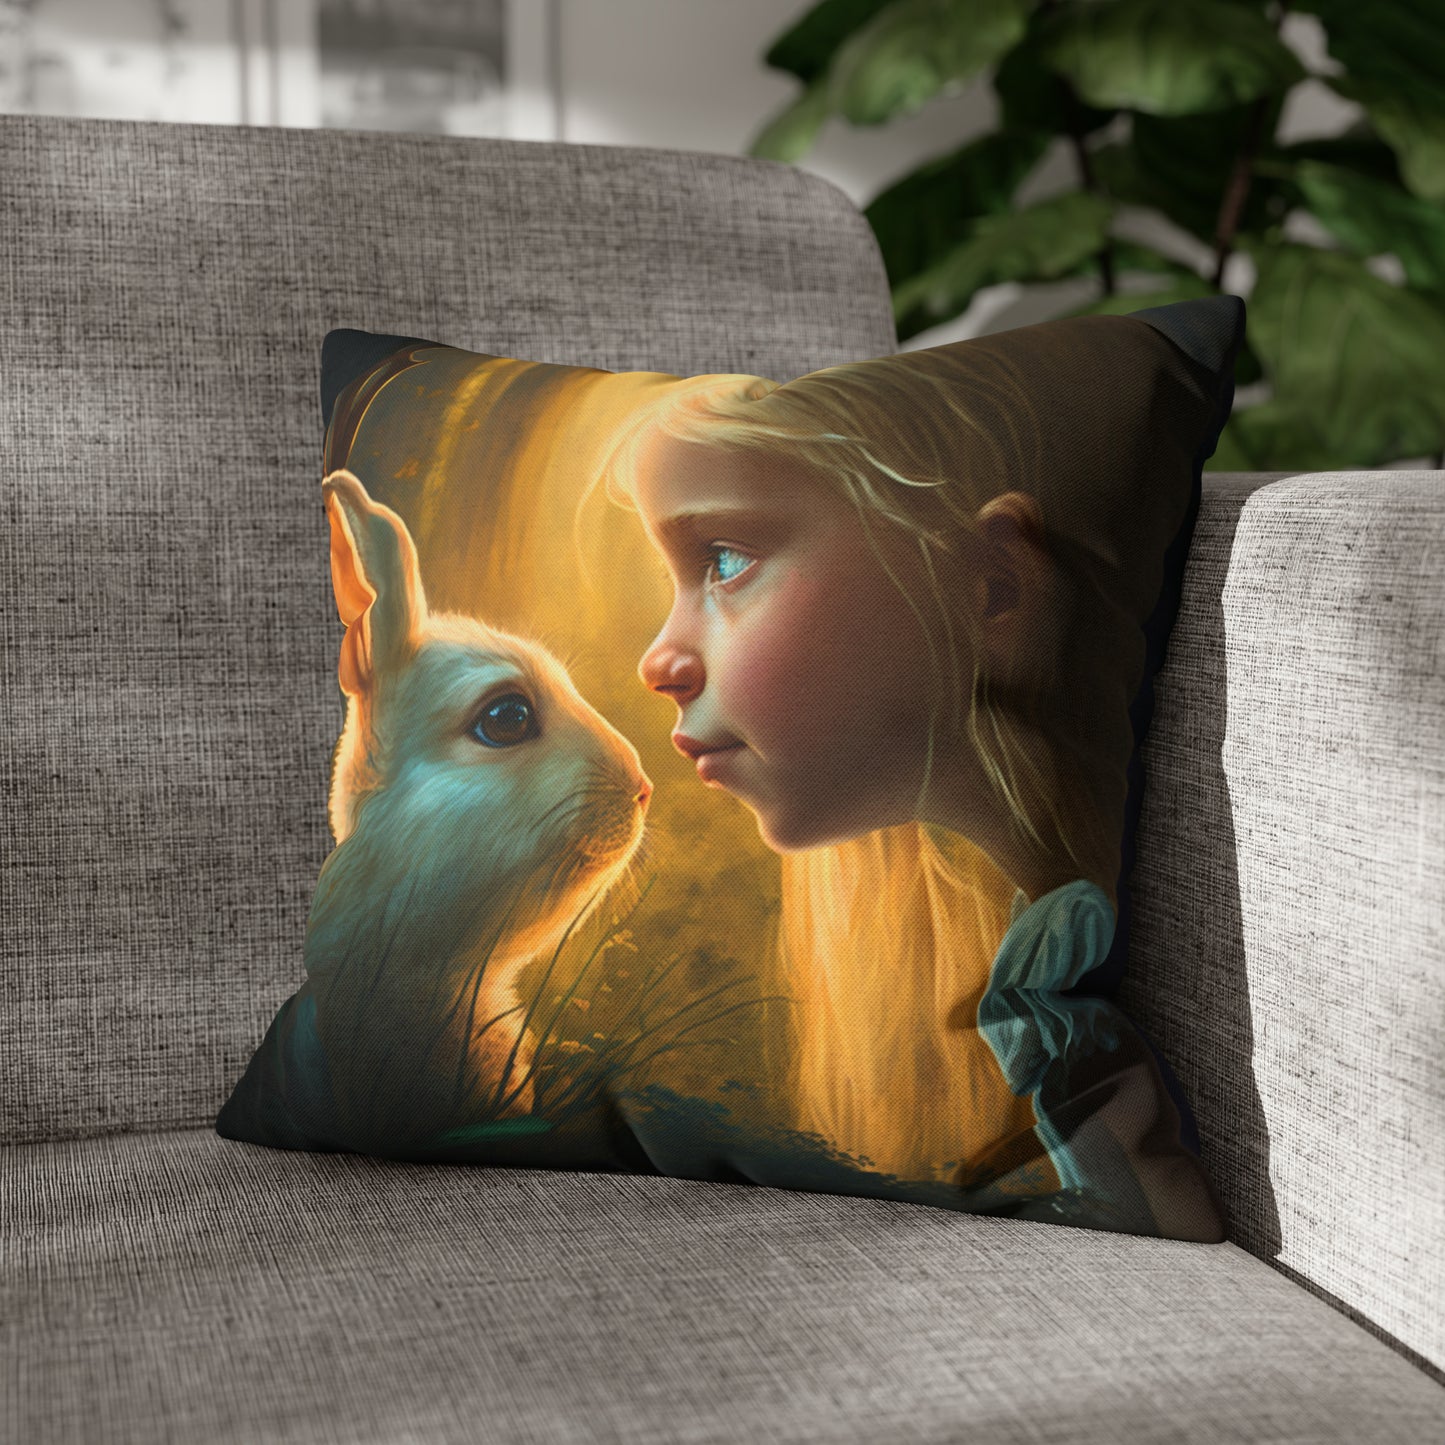 Square Pillow - Lucy and the Enchanted Forest 1